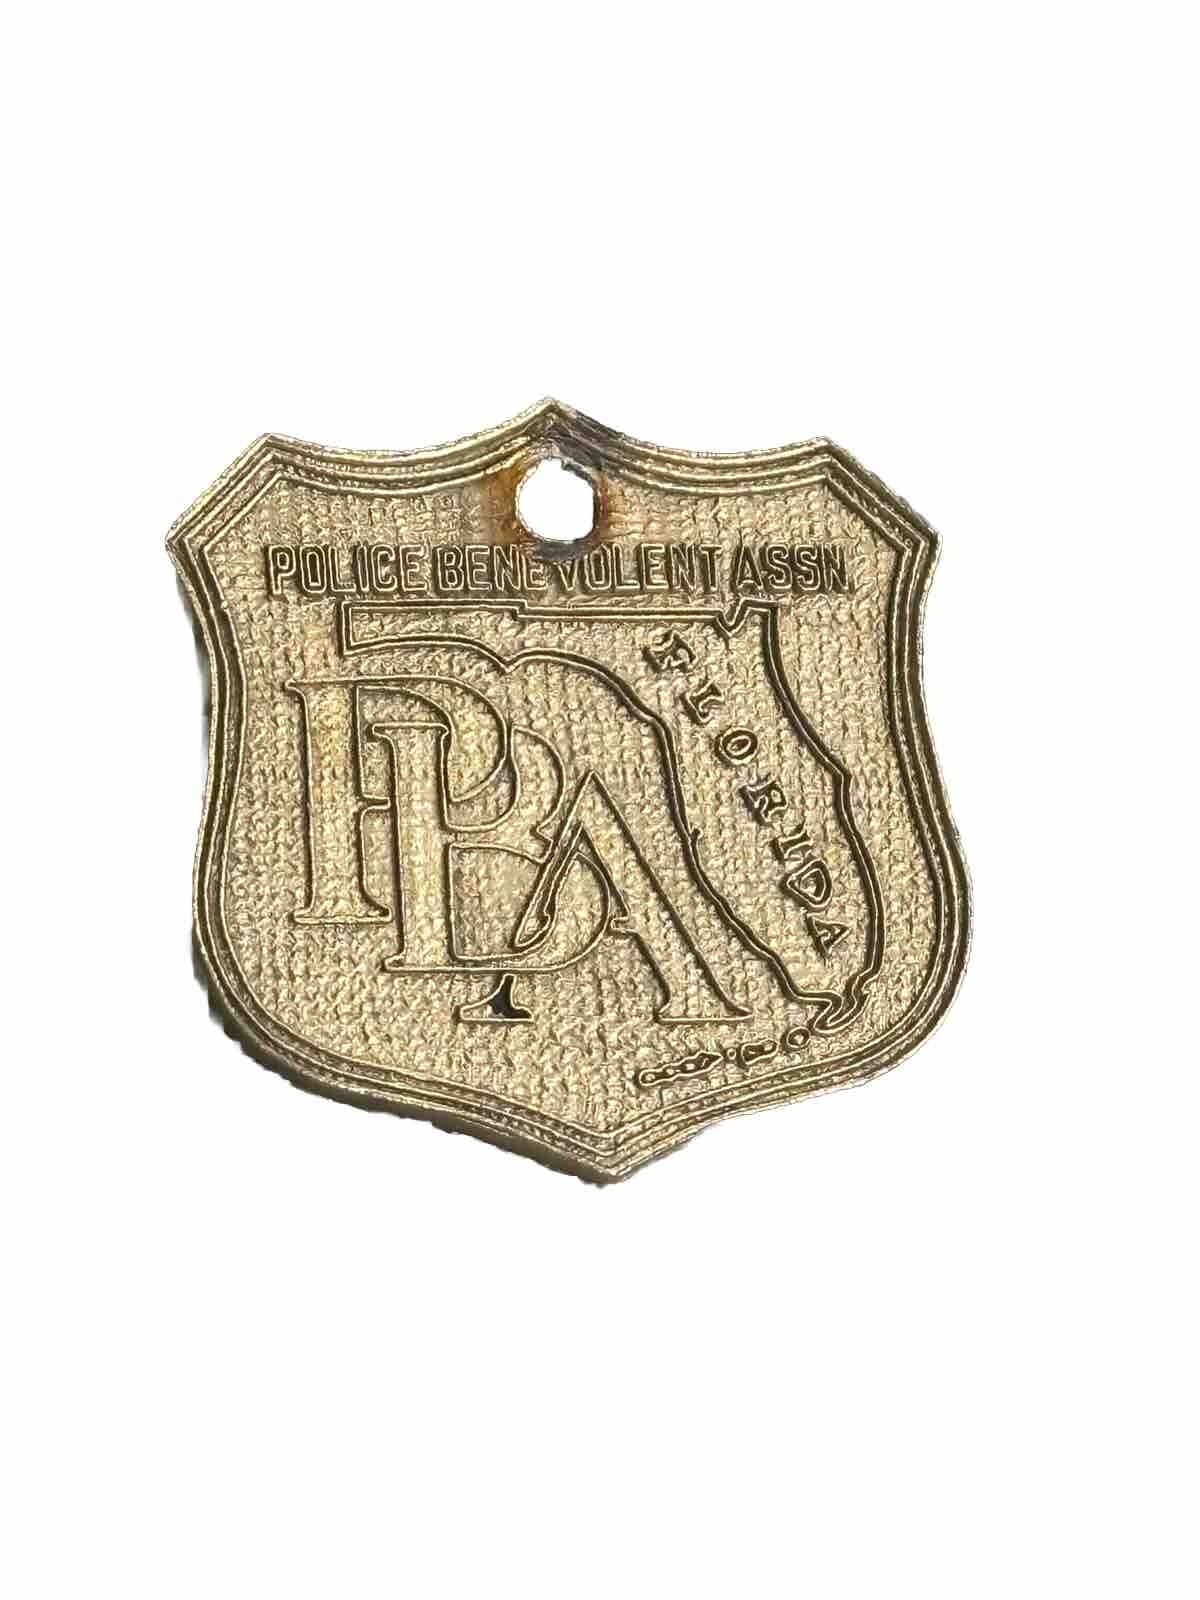 PBA FLORIDA LAW ENFORCEMENT SUPPORTER CAR GOLD POLICE LICENSE TAG SHIELD PLATE  